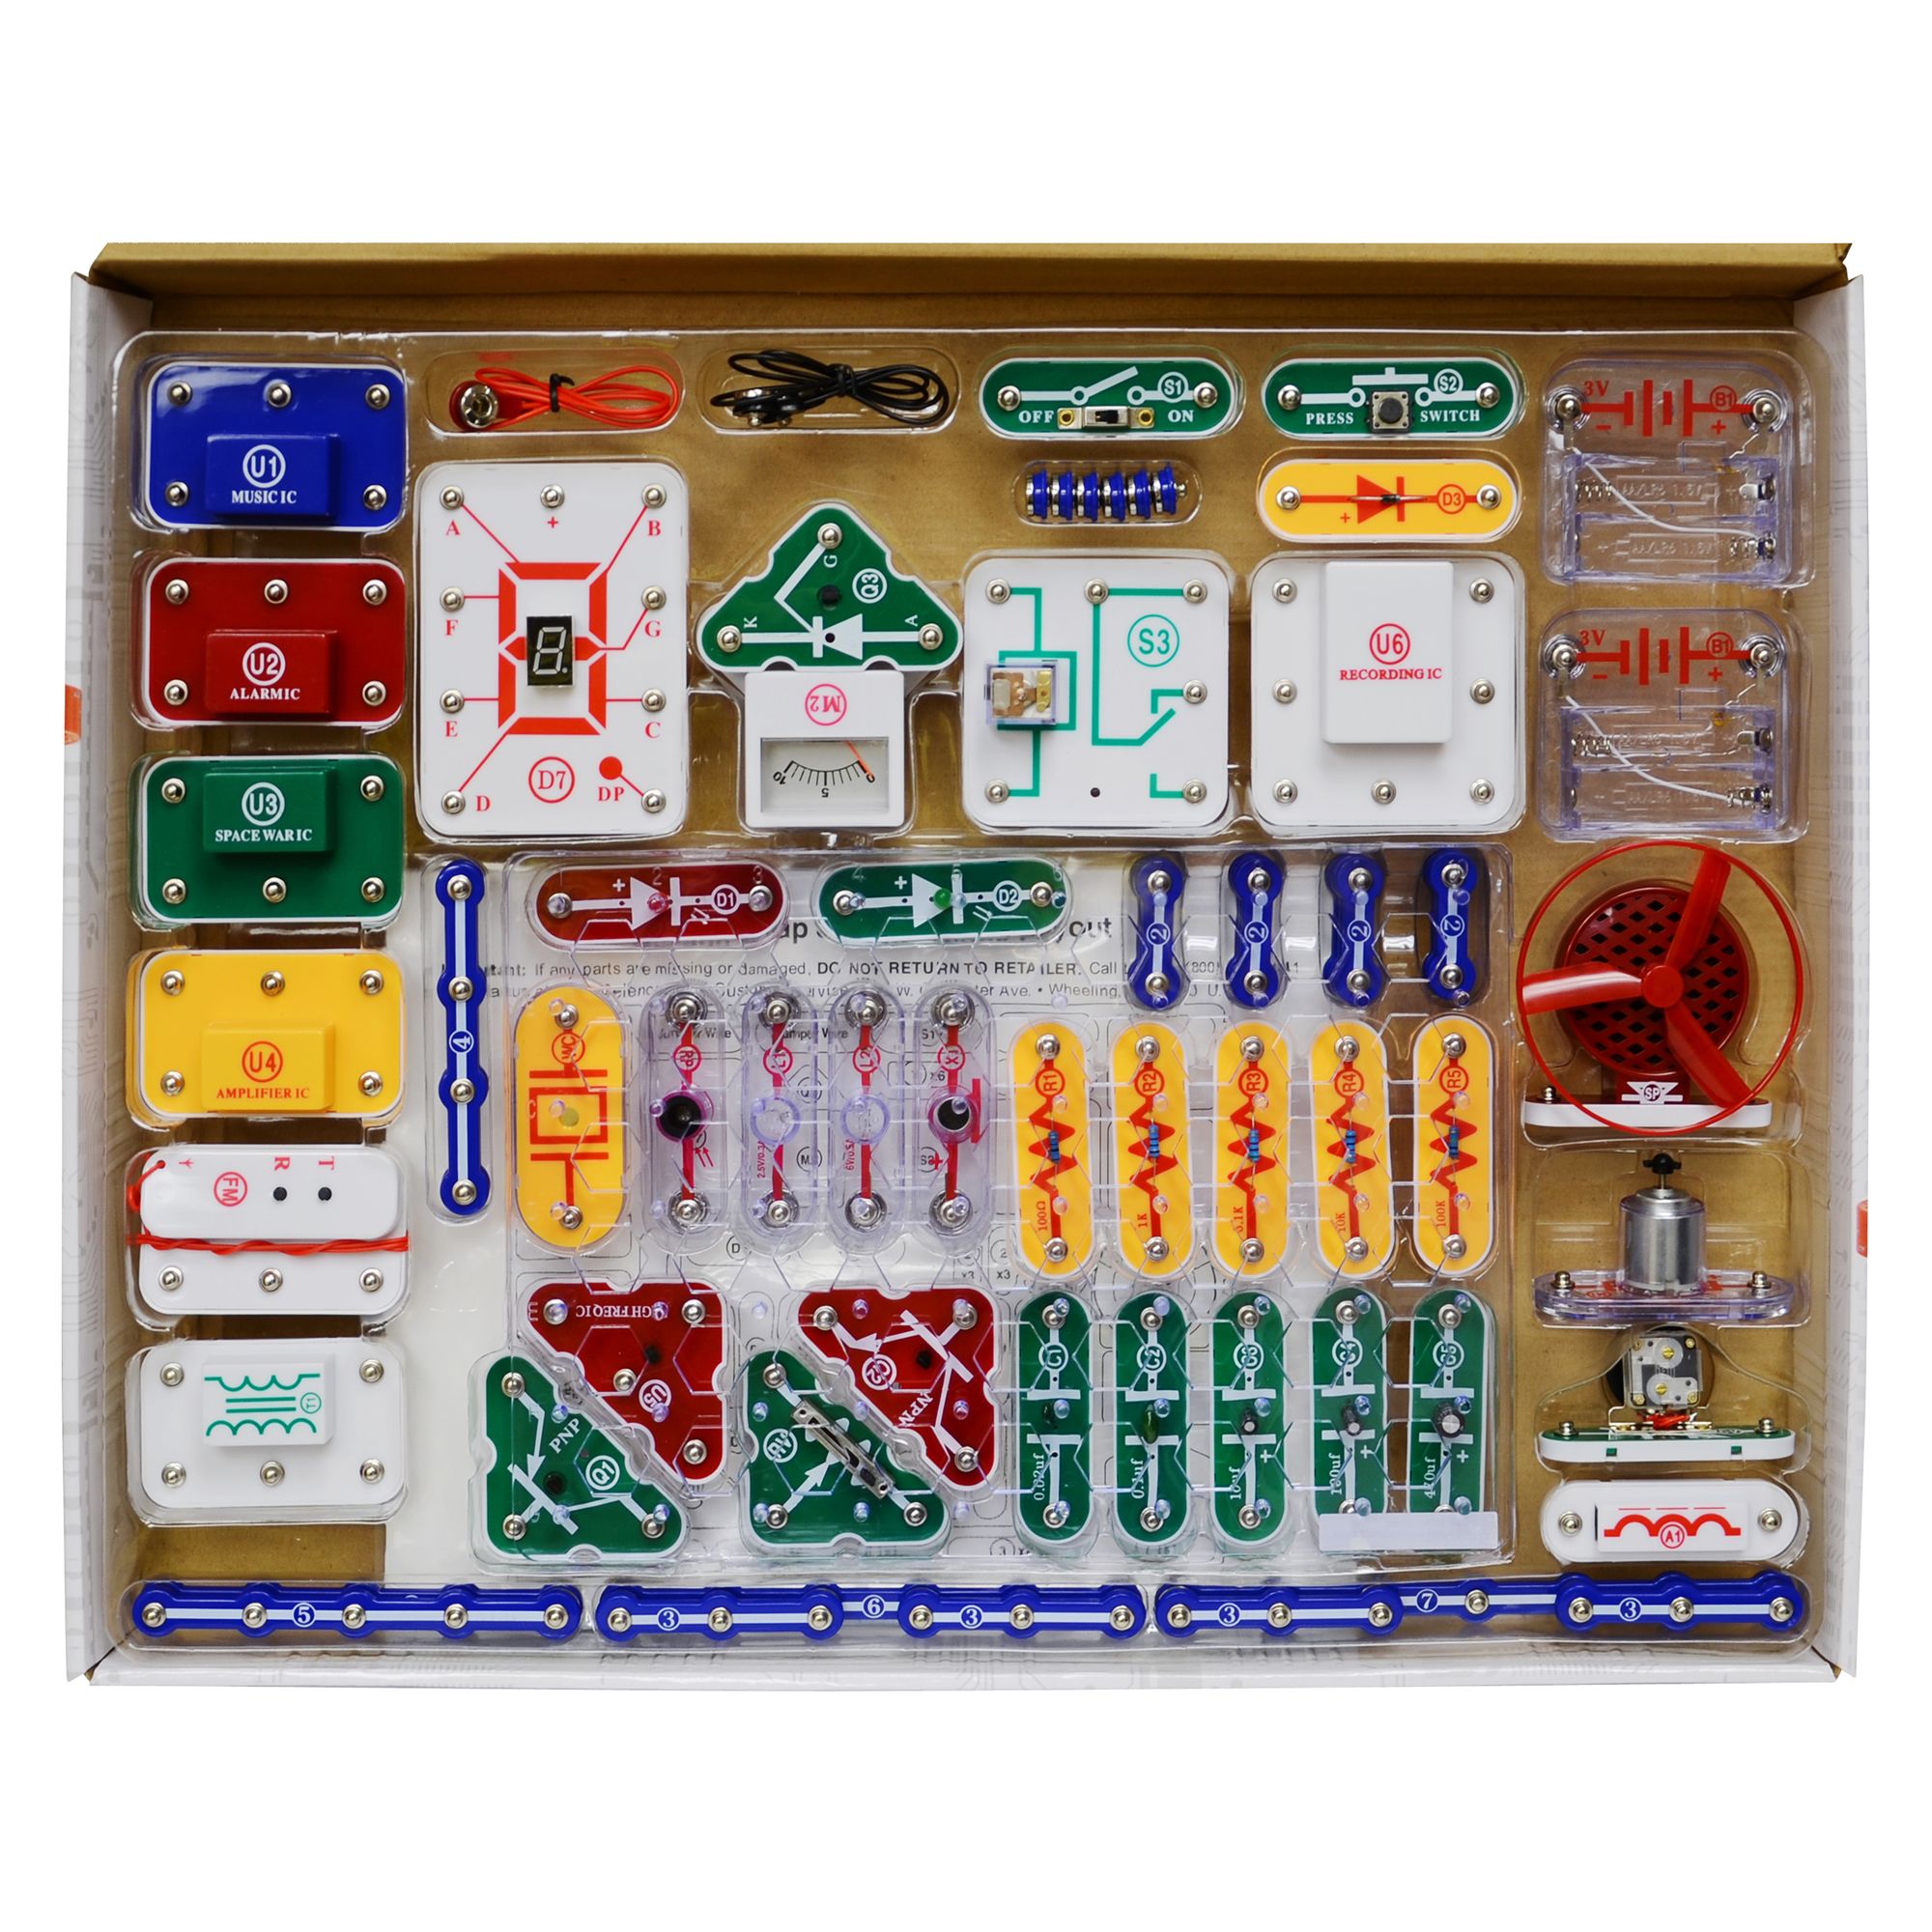 Snap Circuits Pro SC-500 Electronics Exploration Kit | Over 500 Projects  Full Color Project Manual 73 + Parts STEM Educational Toy for Kids 8